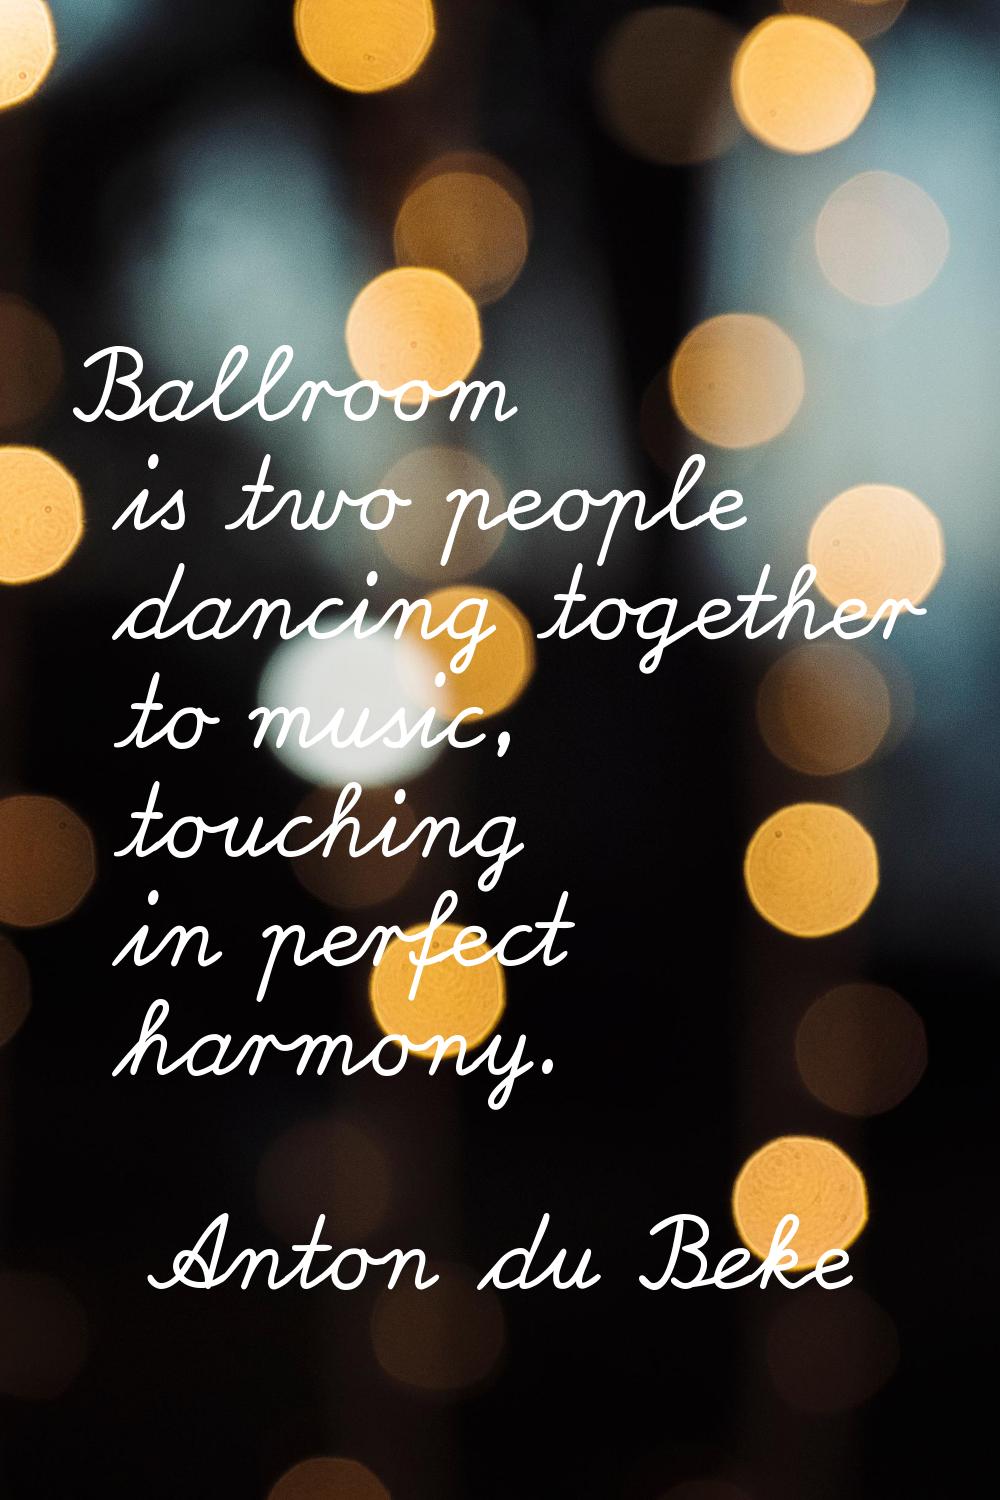 Ballroom is two people dancing together to music, touching in perfect harmony.